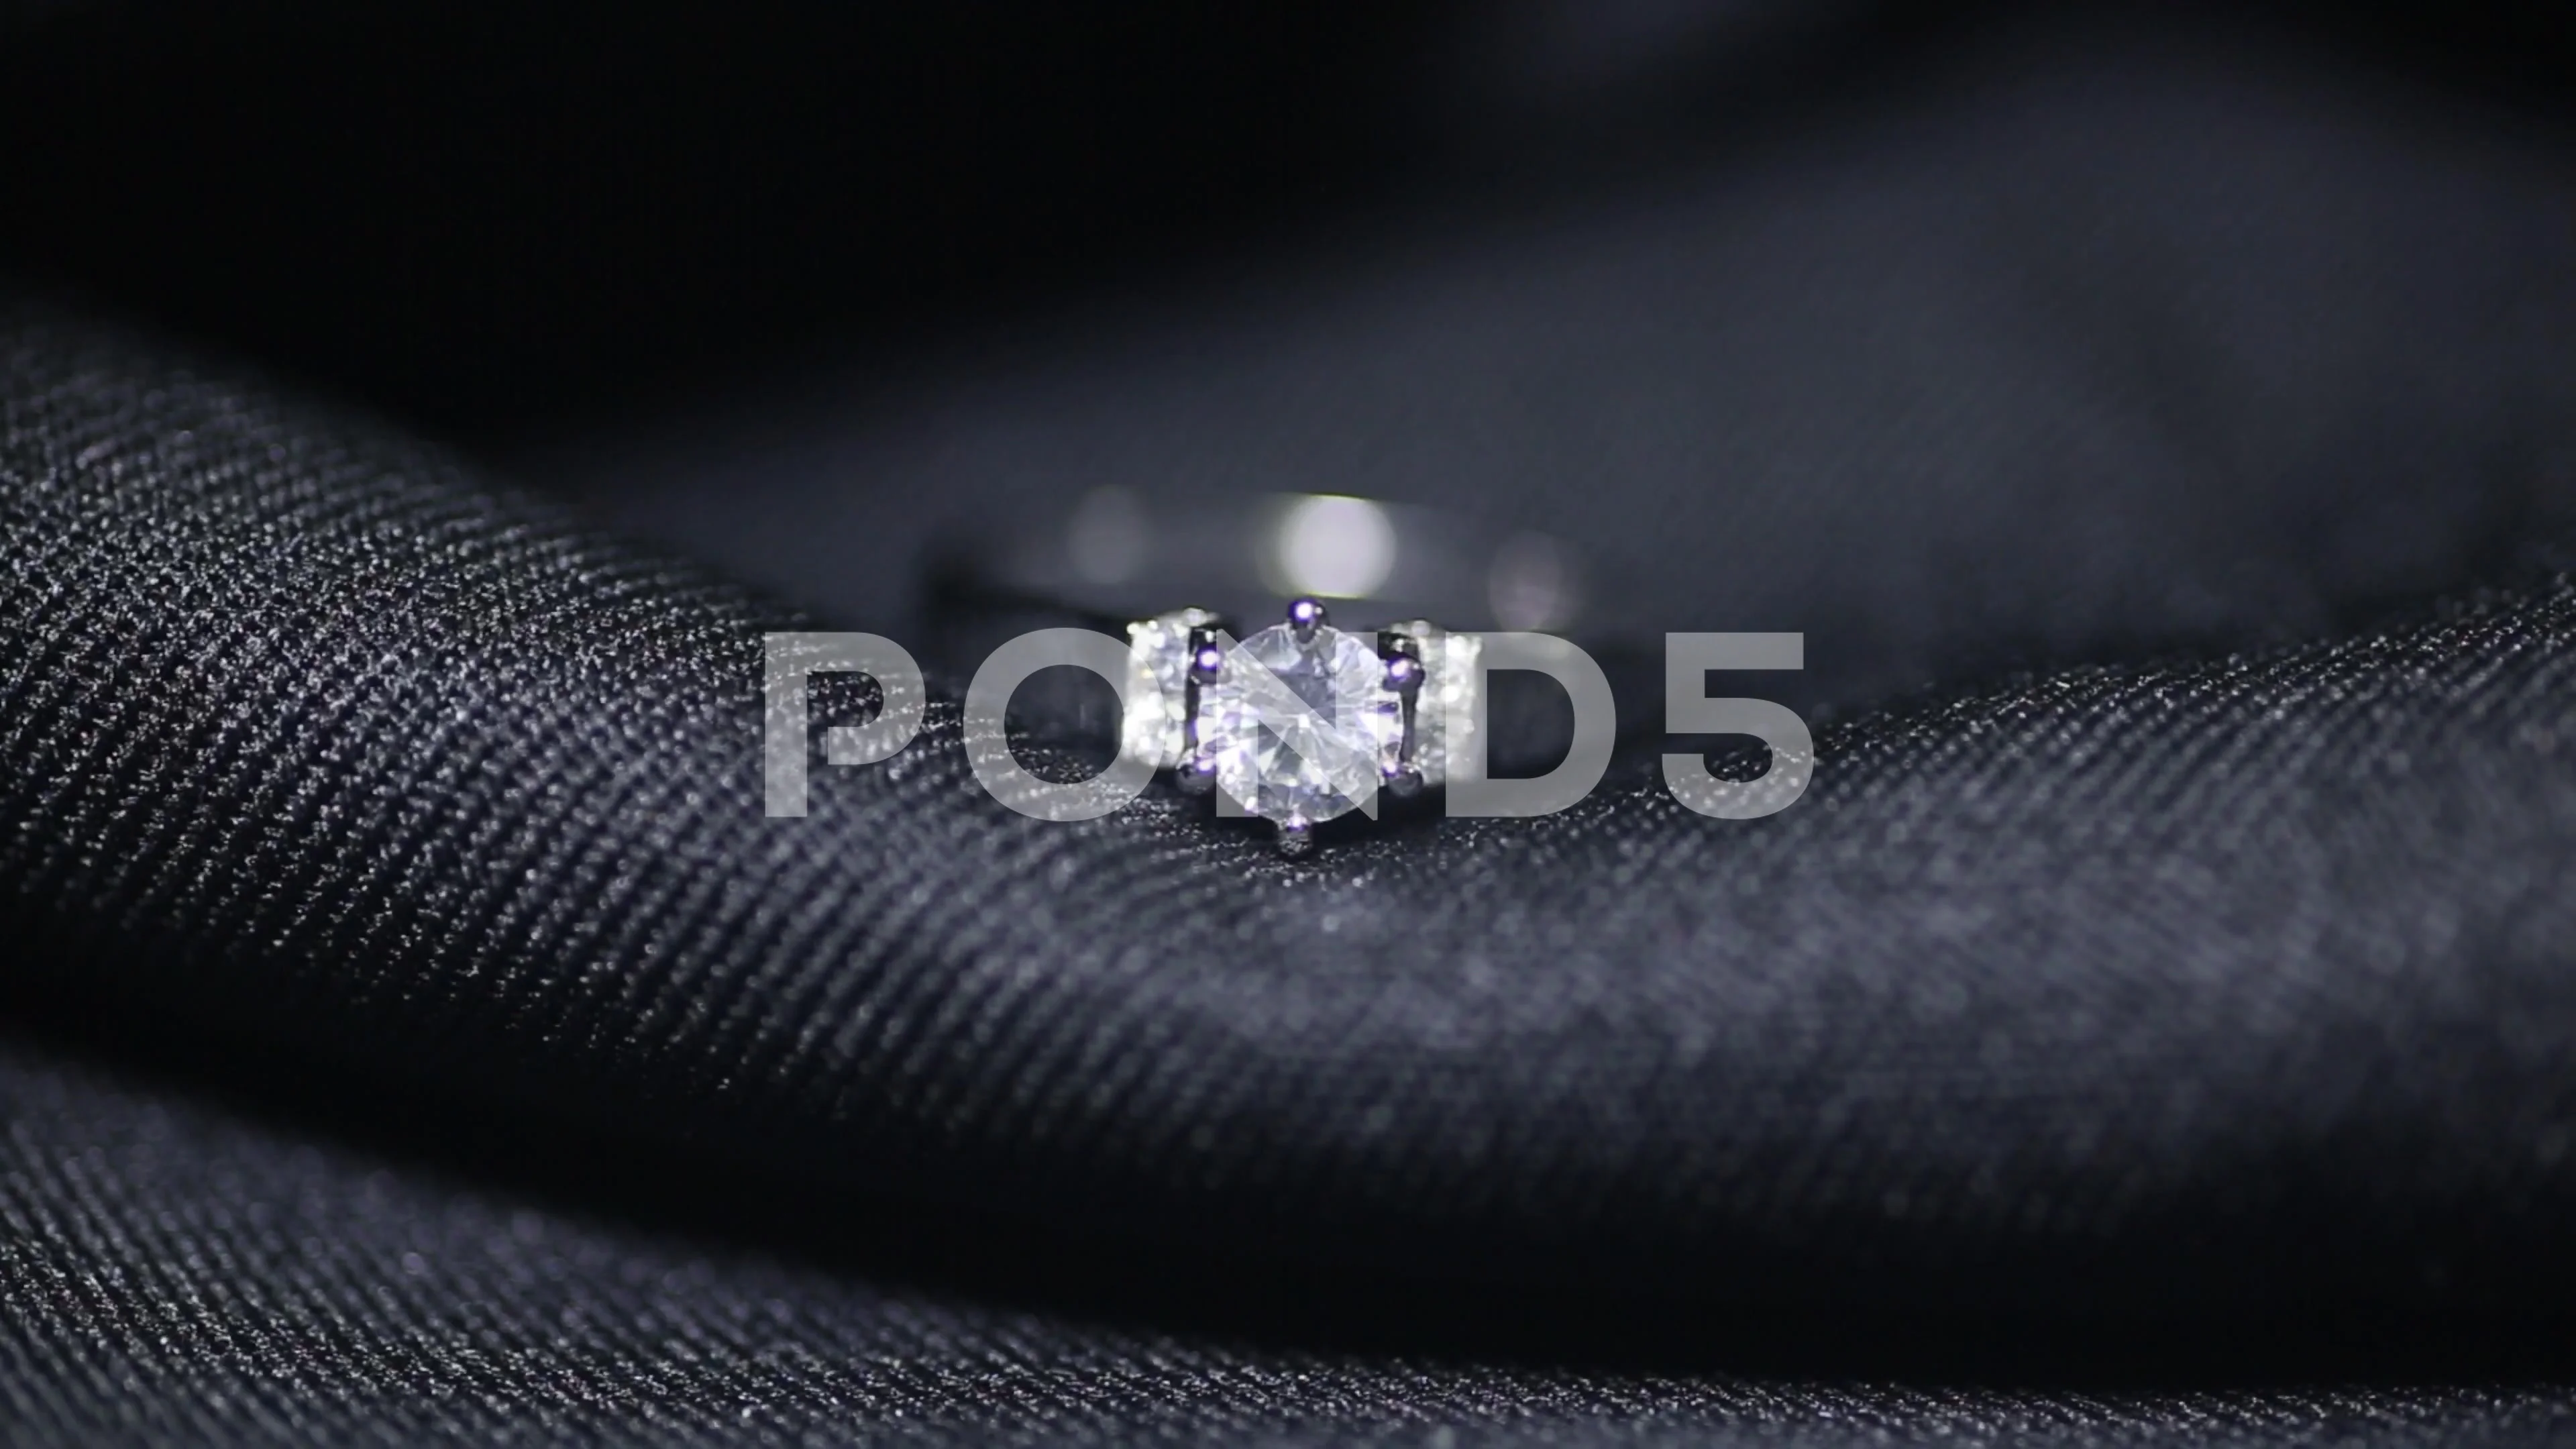 766 Diamond Ring Photos, Pictures And Background Images For Free Download -  Pngtree